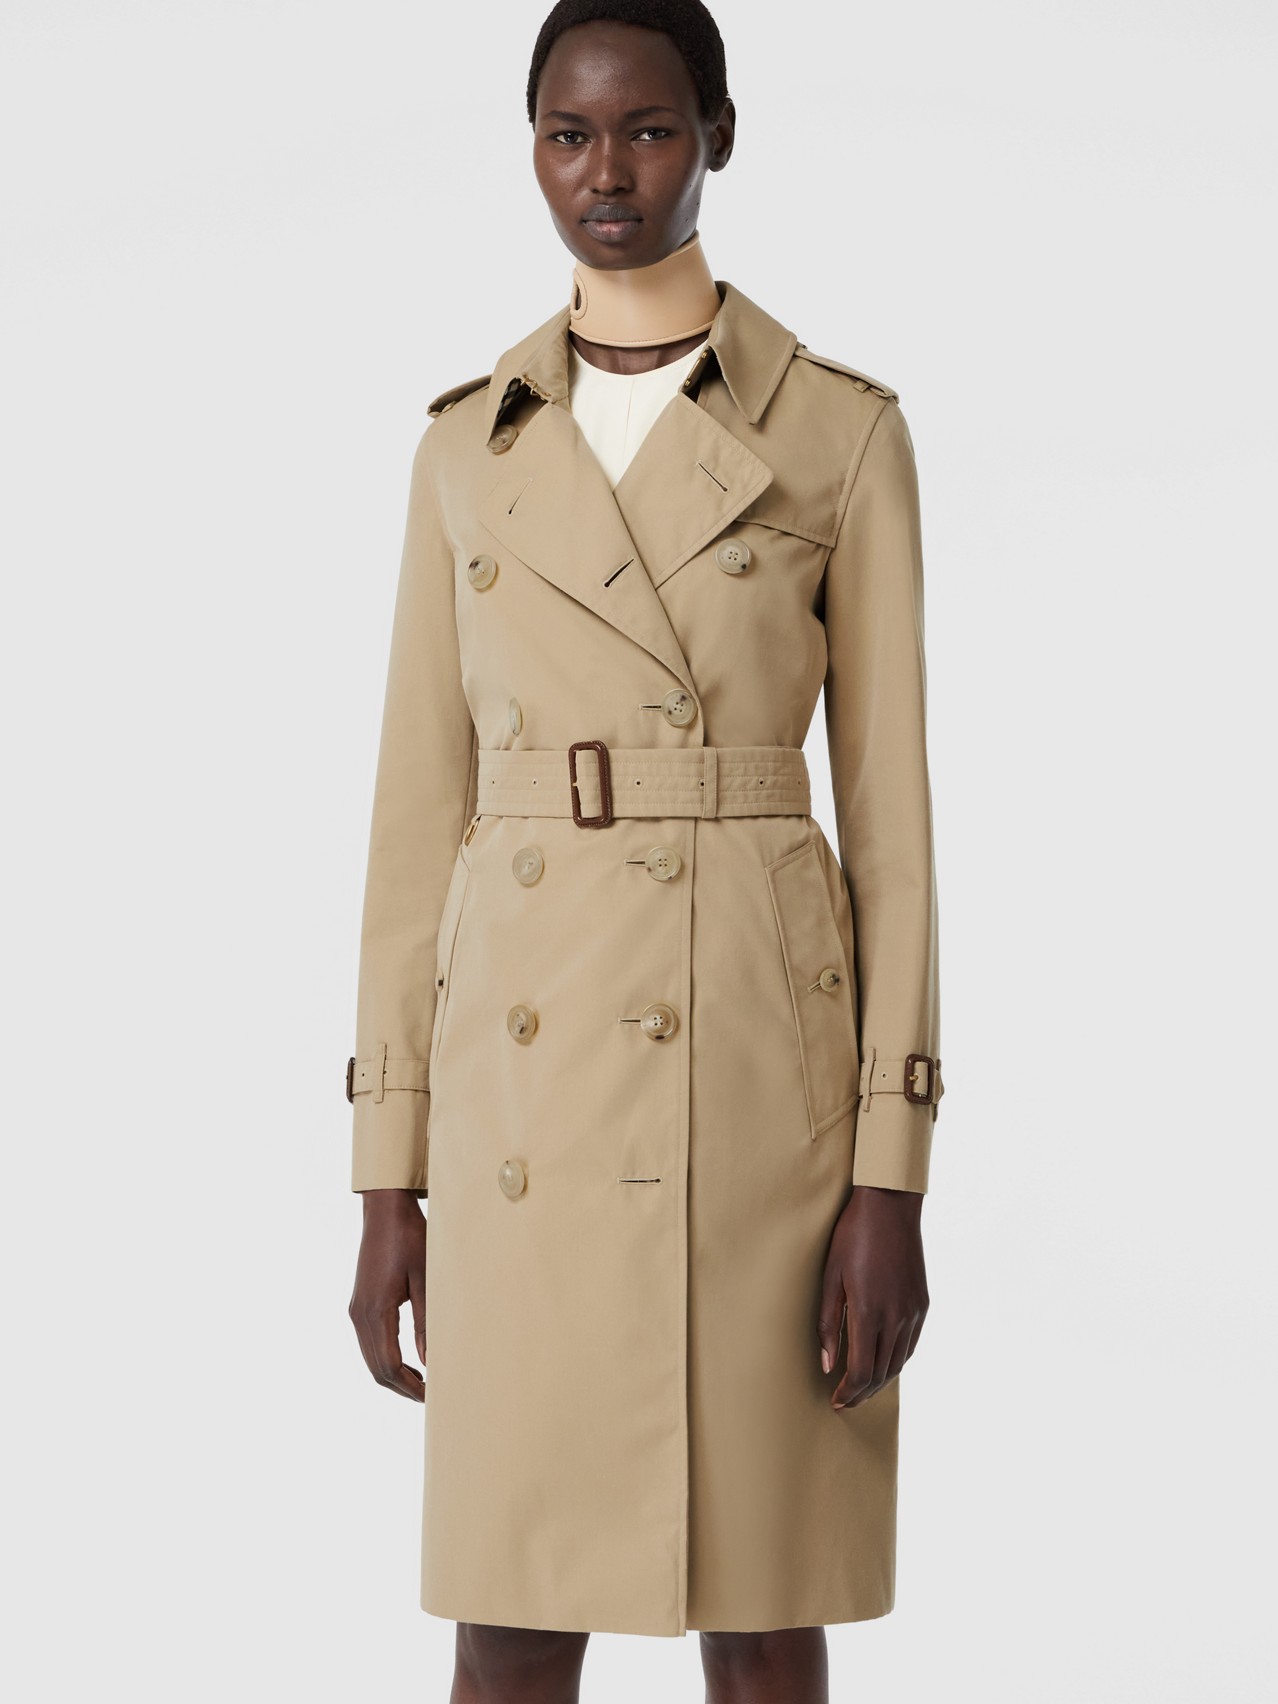 The Long Kensington Heritage Trench Coat by Burberry, available on burberry.com for $1650 Gigi Hadid Outerwear SIMILAR PRODUCT